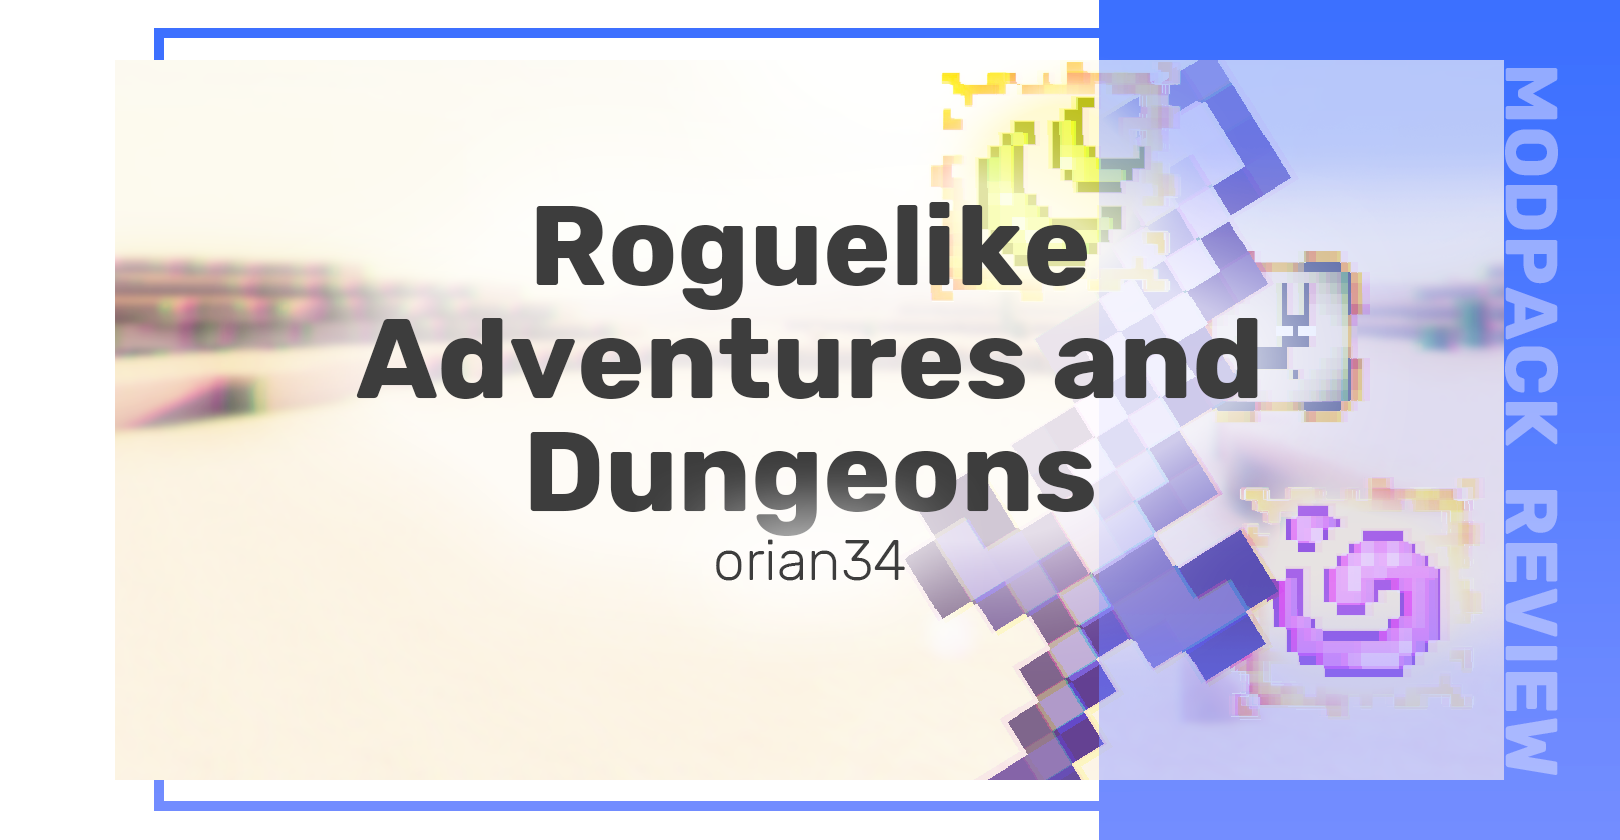 Walking Through Roguelike Adventures and Dungeons